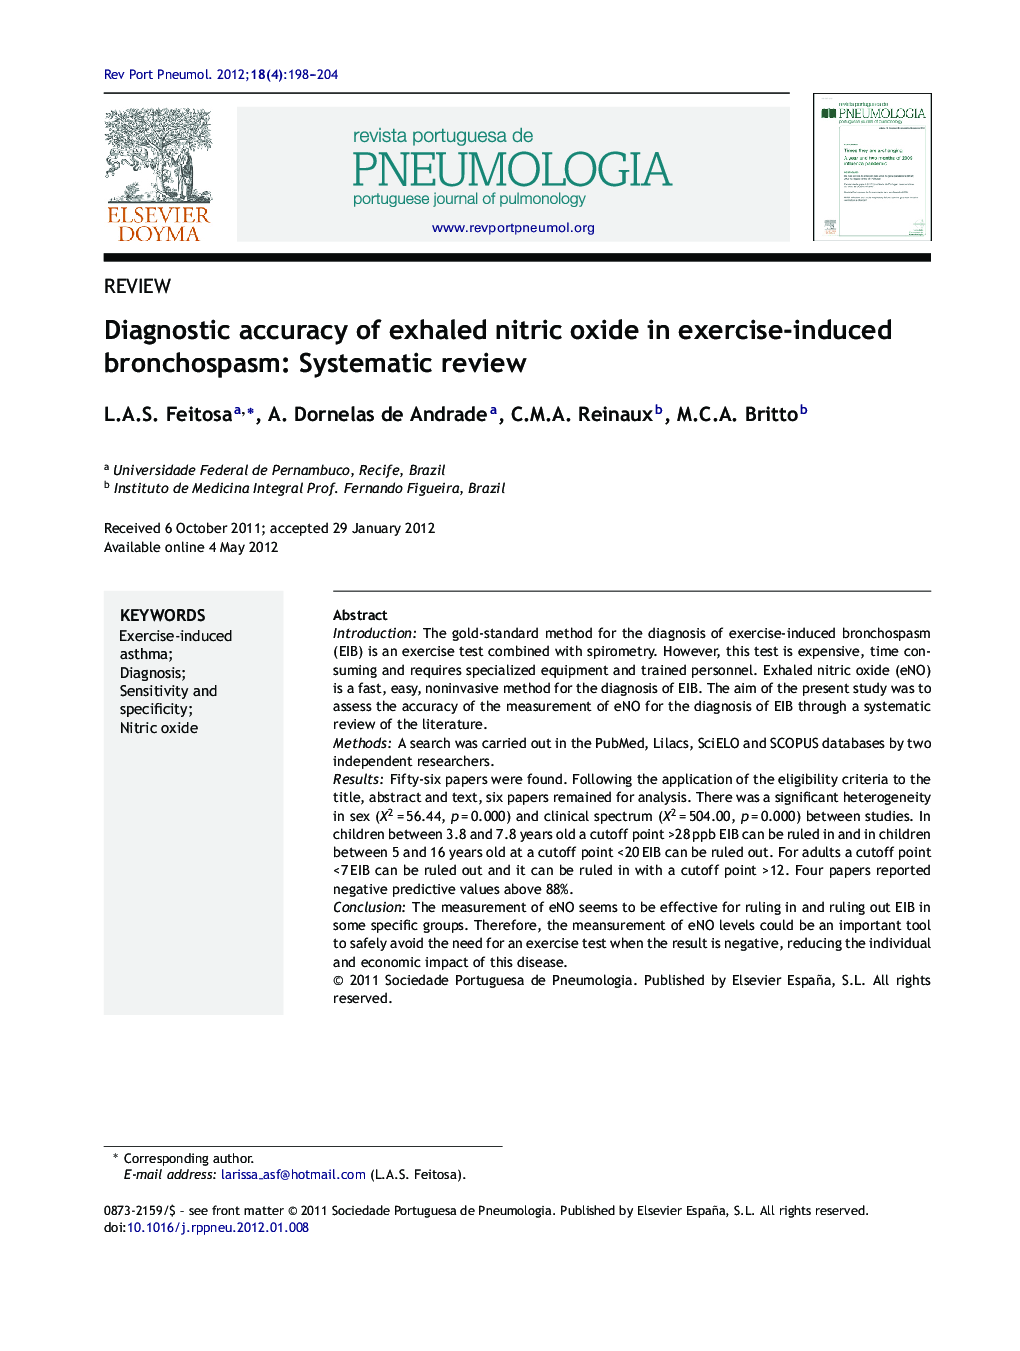 Diagnostic accuracy of exhaled nitric oxide in exercise-induced bronchospasm: Systematic review